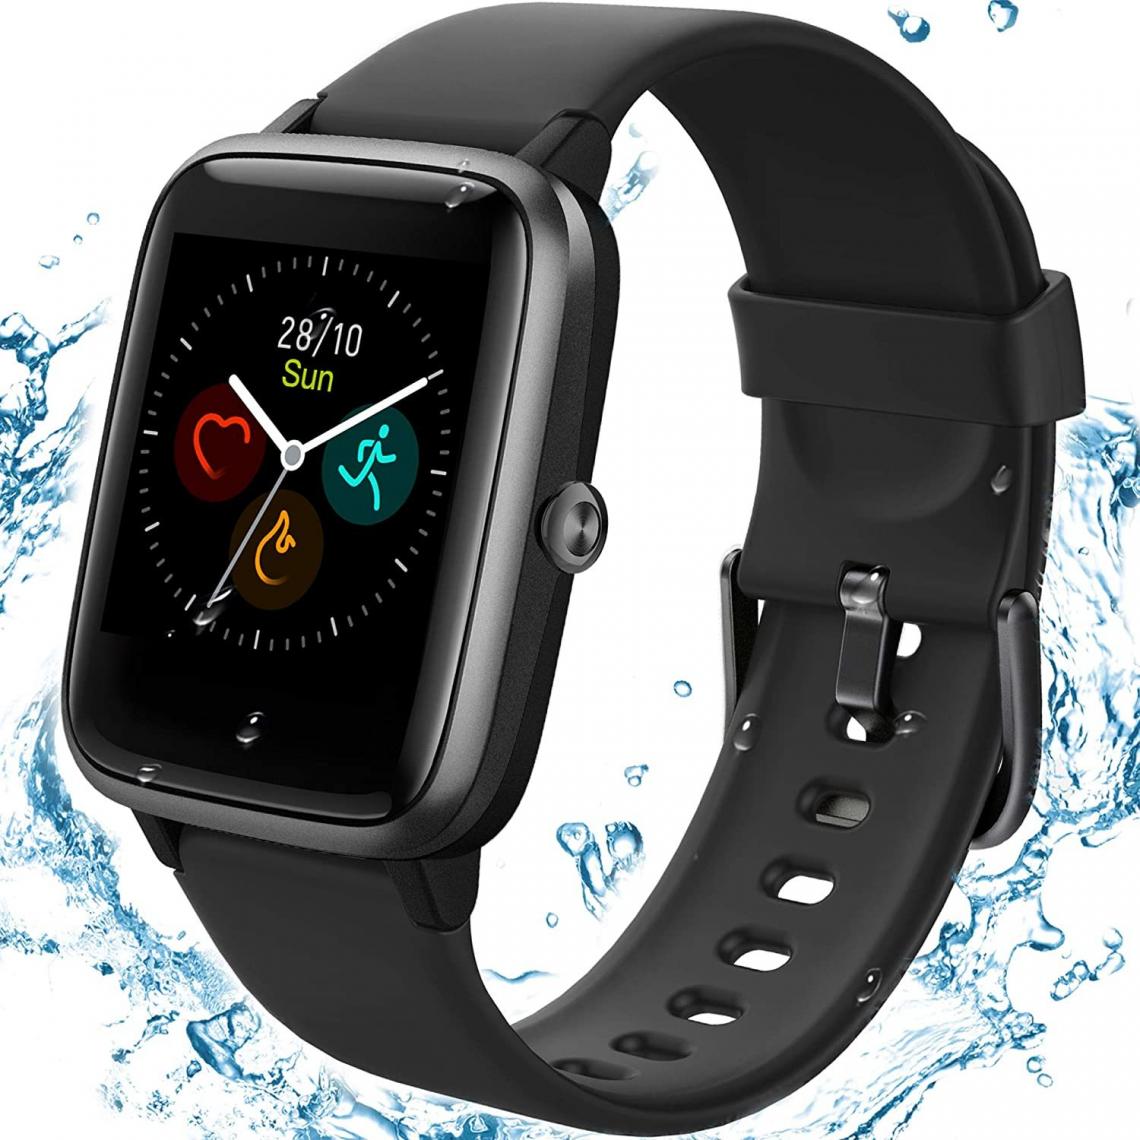 Chronotech Montres - Chronus Smart Watch Fitness Tracker ID205L - Compatible with Apple iPhone iOS Android Samsung - Heart Rate Monitor - App Text Call Notification - Large 1.3 inch touch Screen - Long battery life(black) - Montre connectée